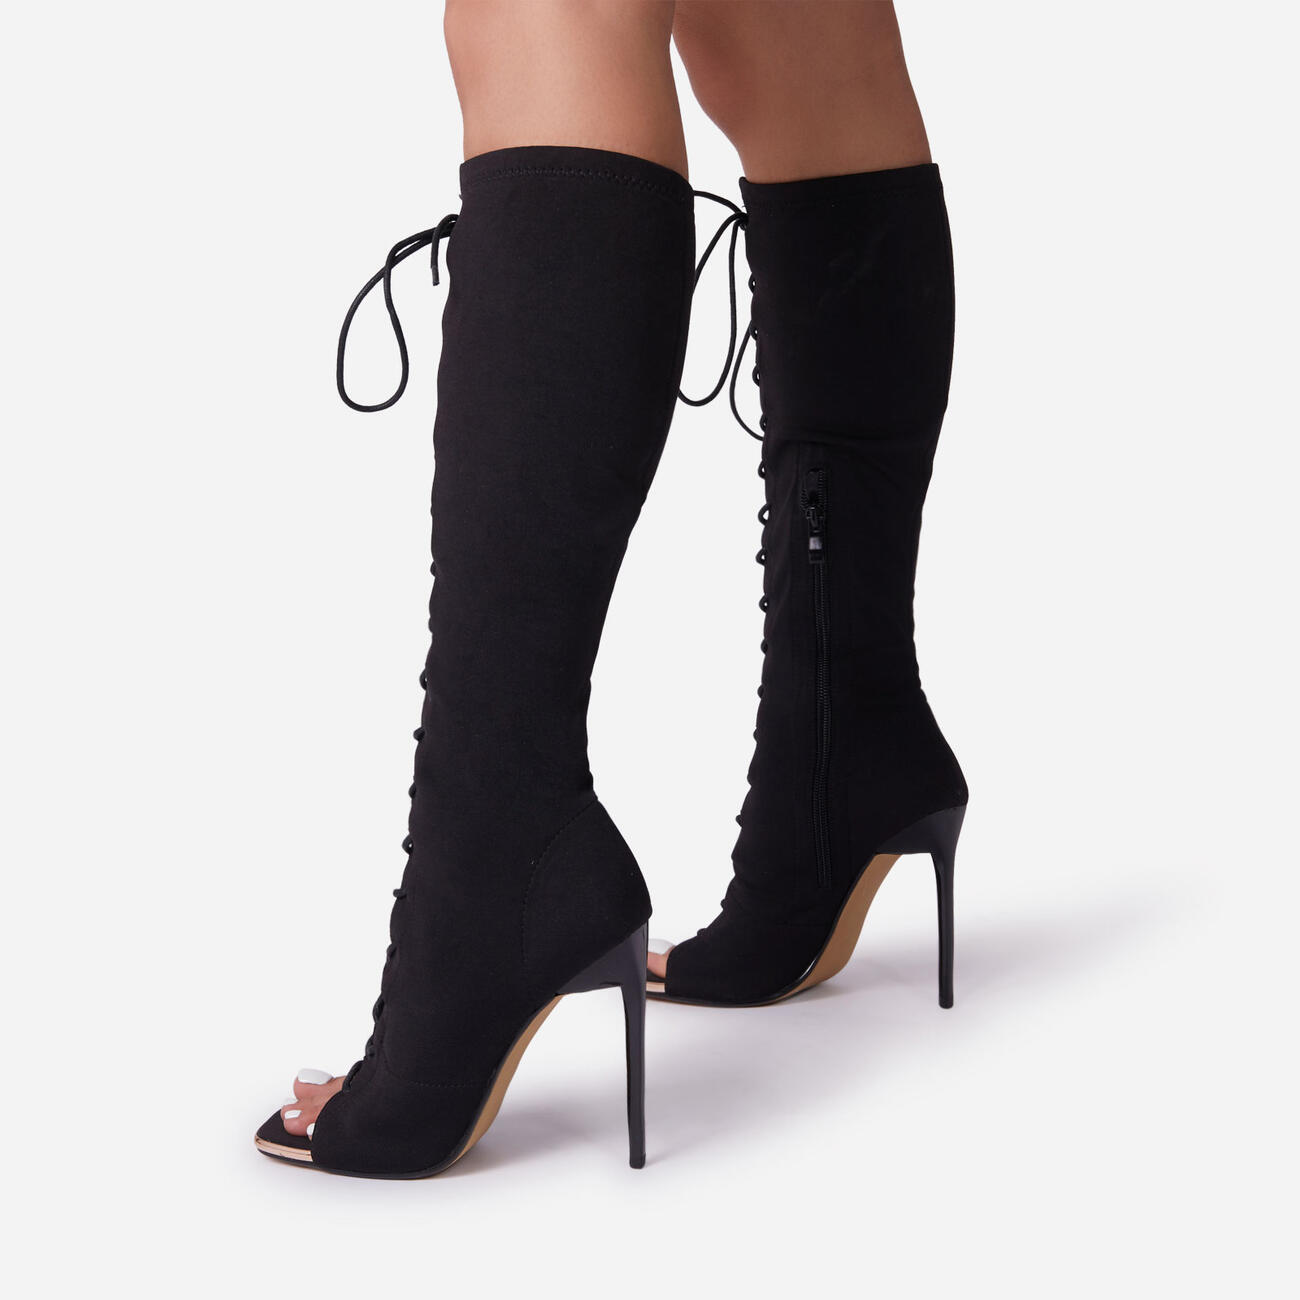 Embers Lace Up Square Peep Toe Knee High Ankle Sock Boot In Black 